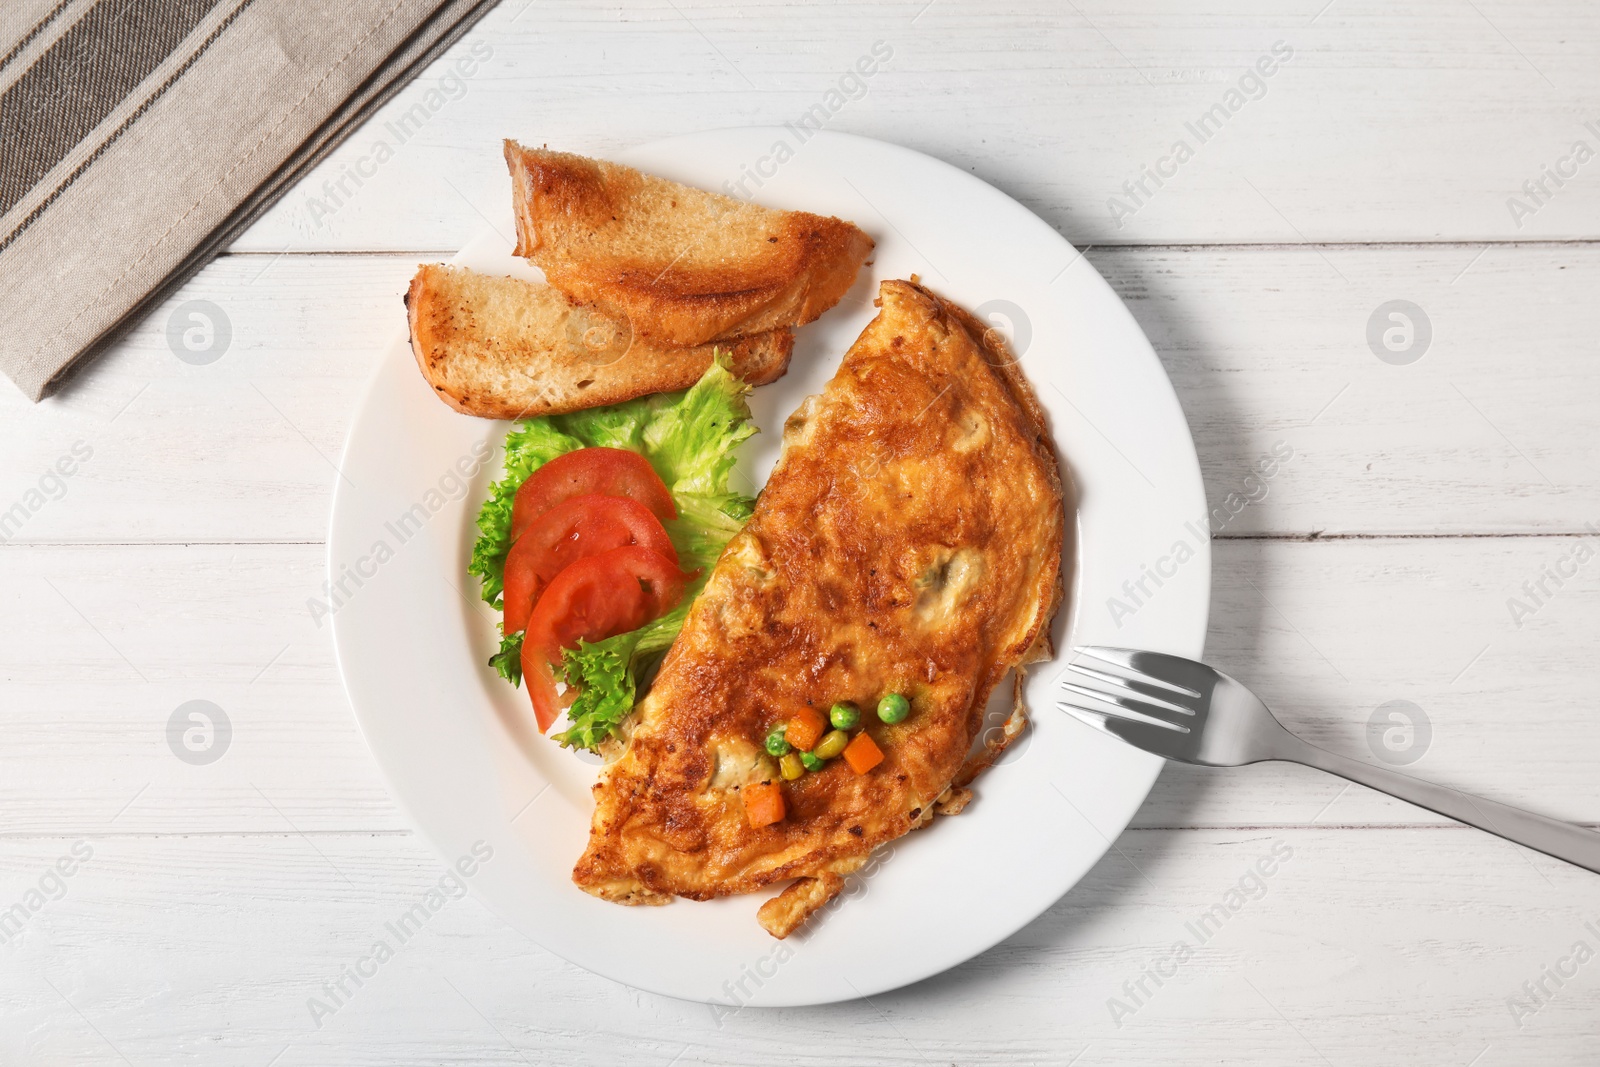 Photo of Omelet with vegetables on plate served for breakfast, top view